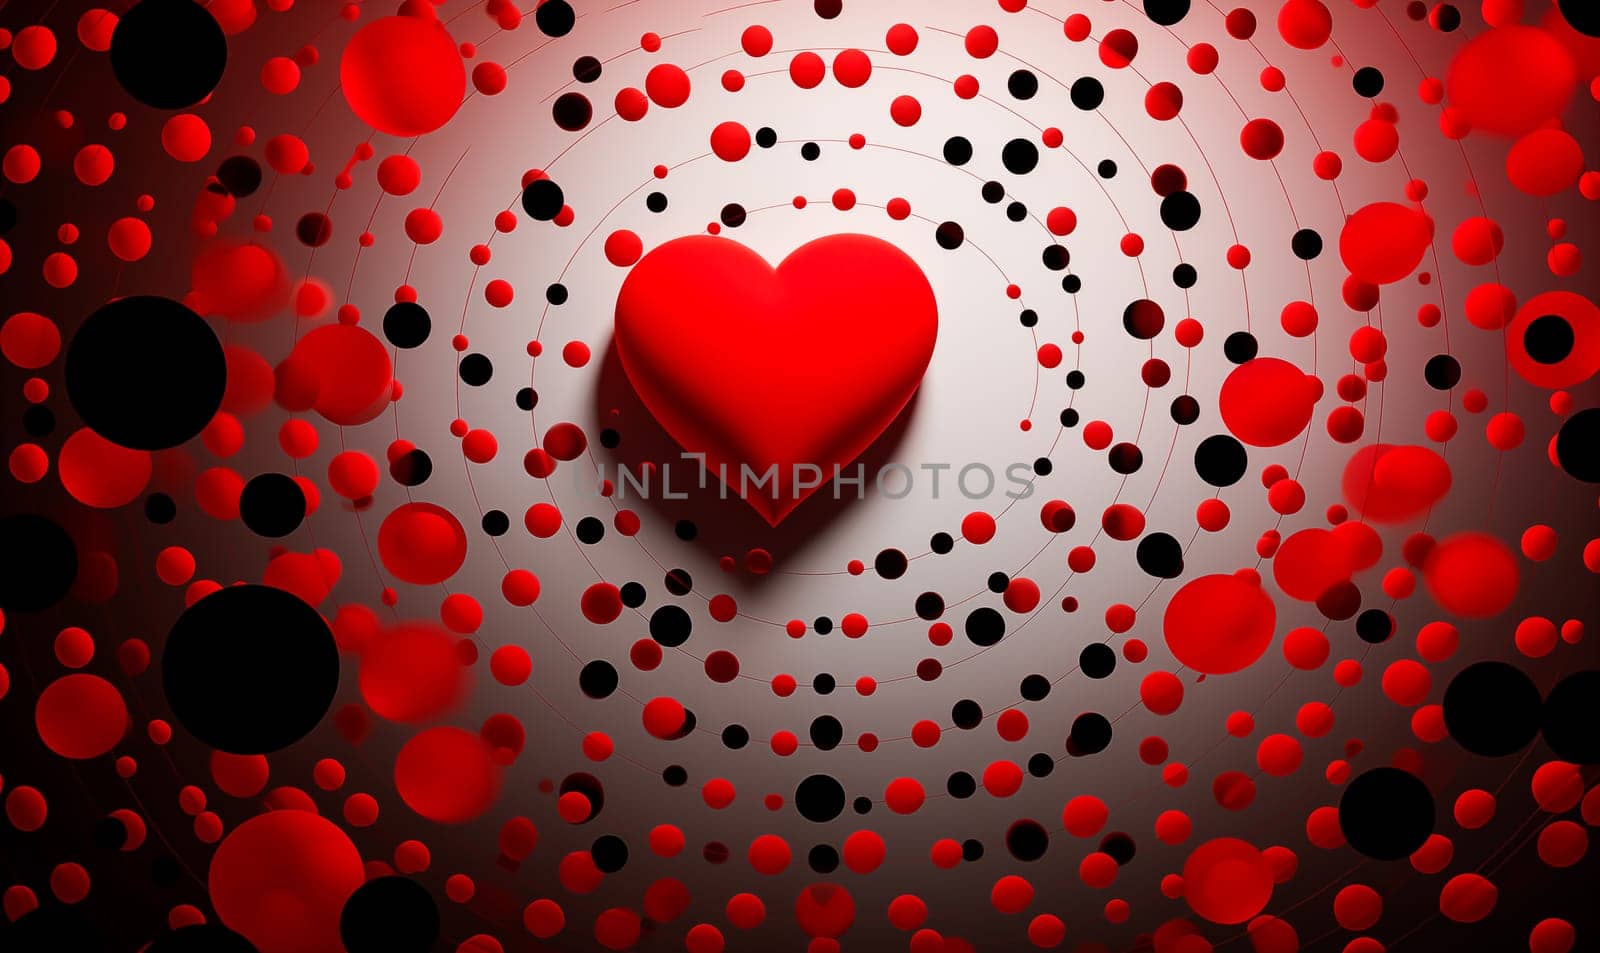 Wallpaper Red Beautiful 3d Red Hearts Surrounded By Red Black Spots, Vibrant Background. Shiny Heart For Saint Valentine's Day. Love, Romance For February 14. Ai Generated. Horizontal Plane. by netatsi